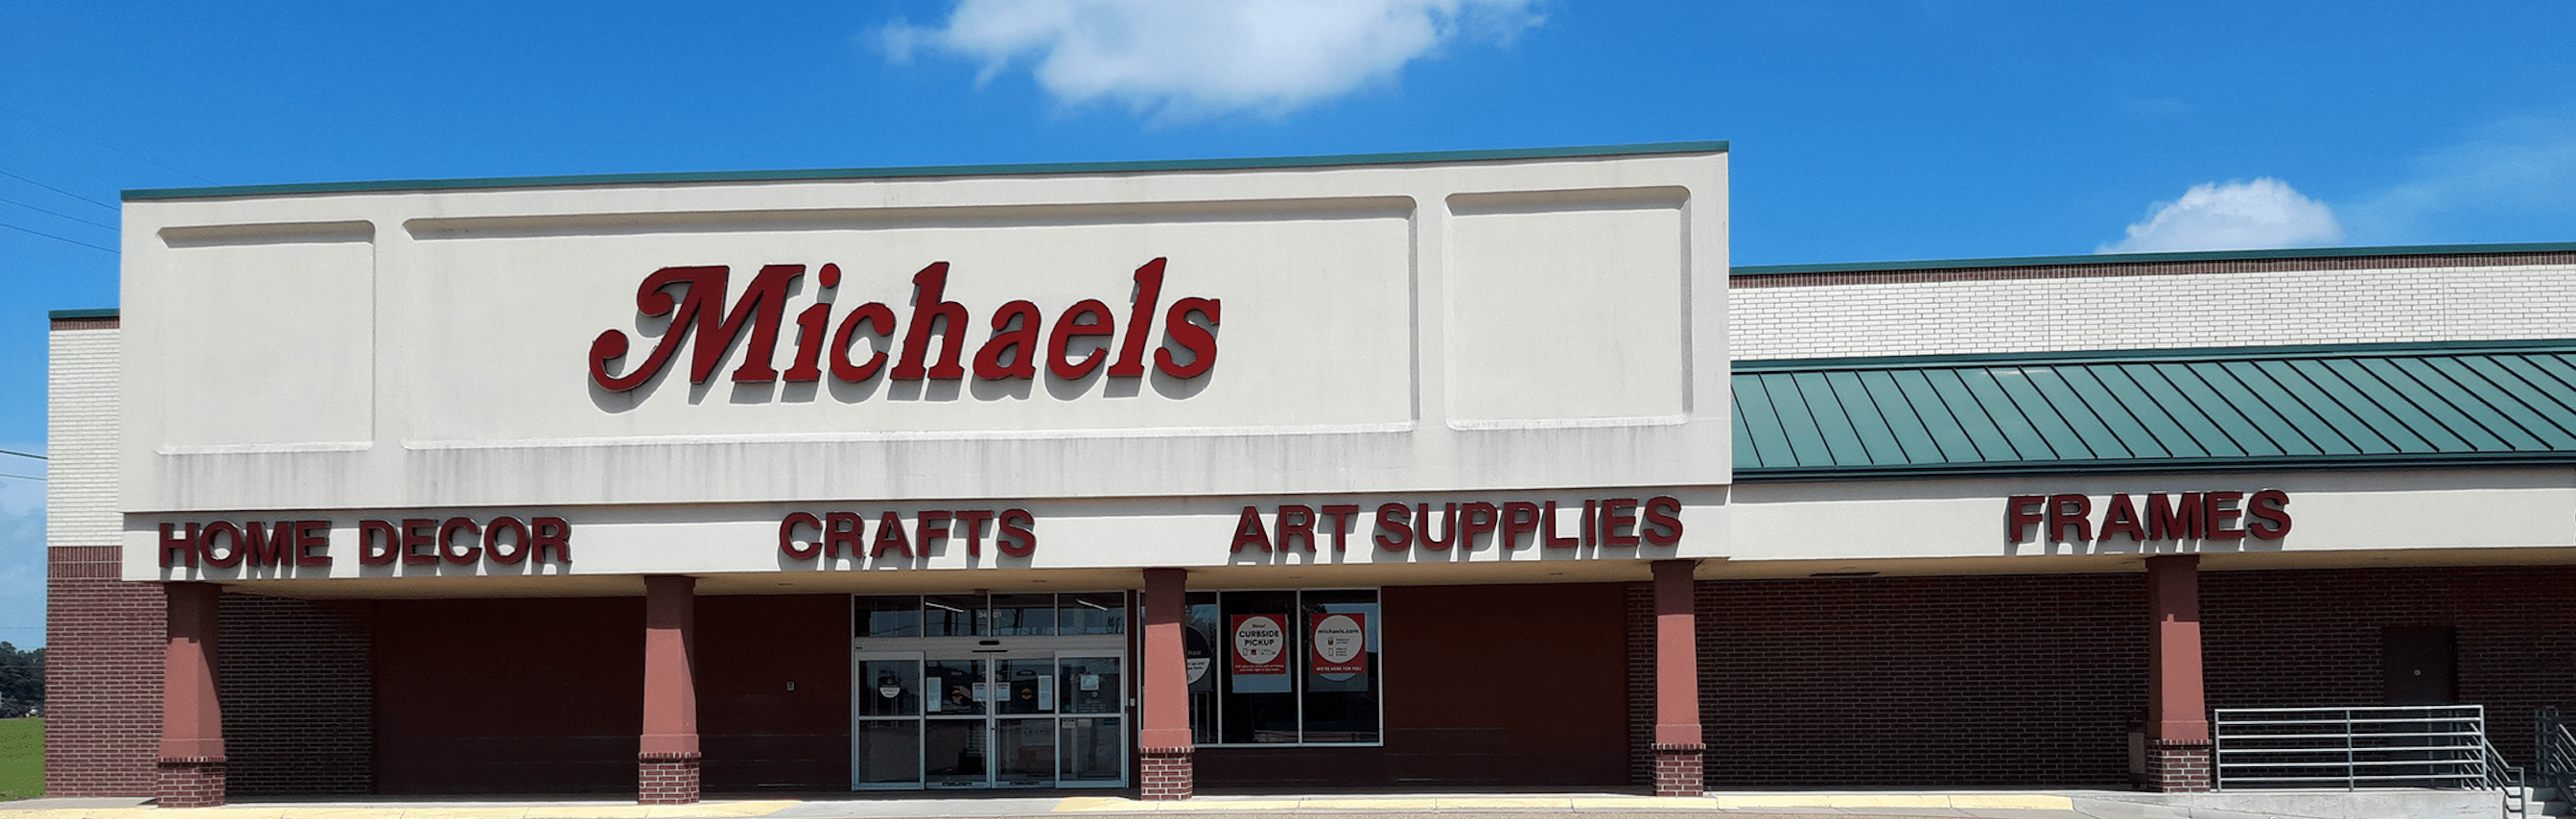 Michaels Stores (@michaelsstores) • Instagram photos and videos